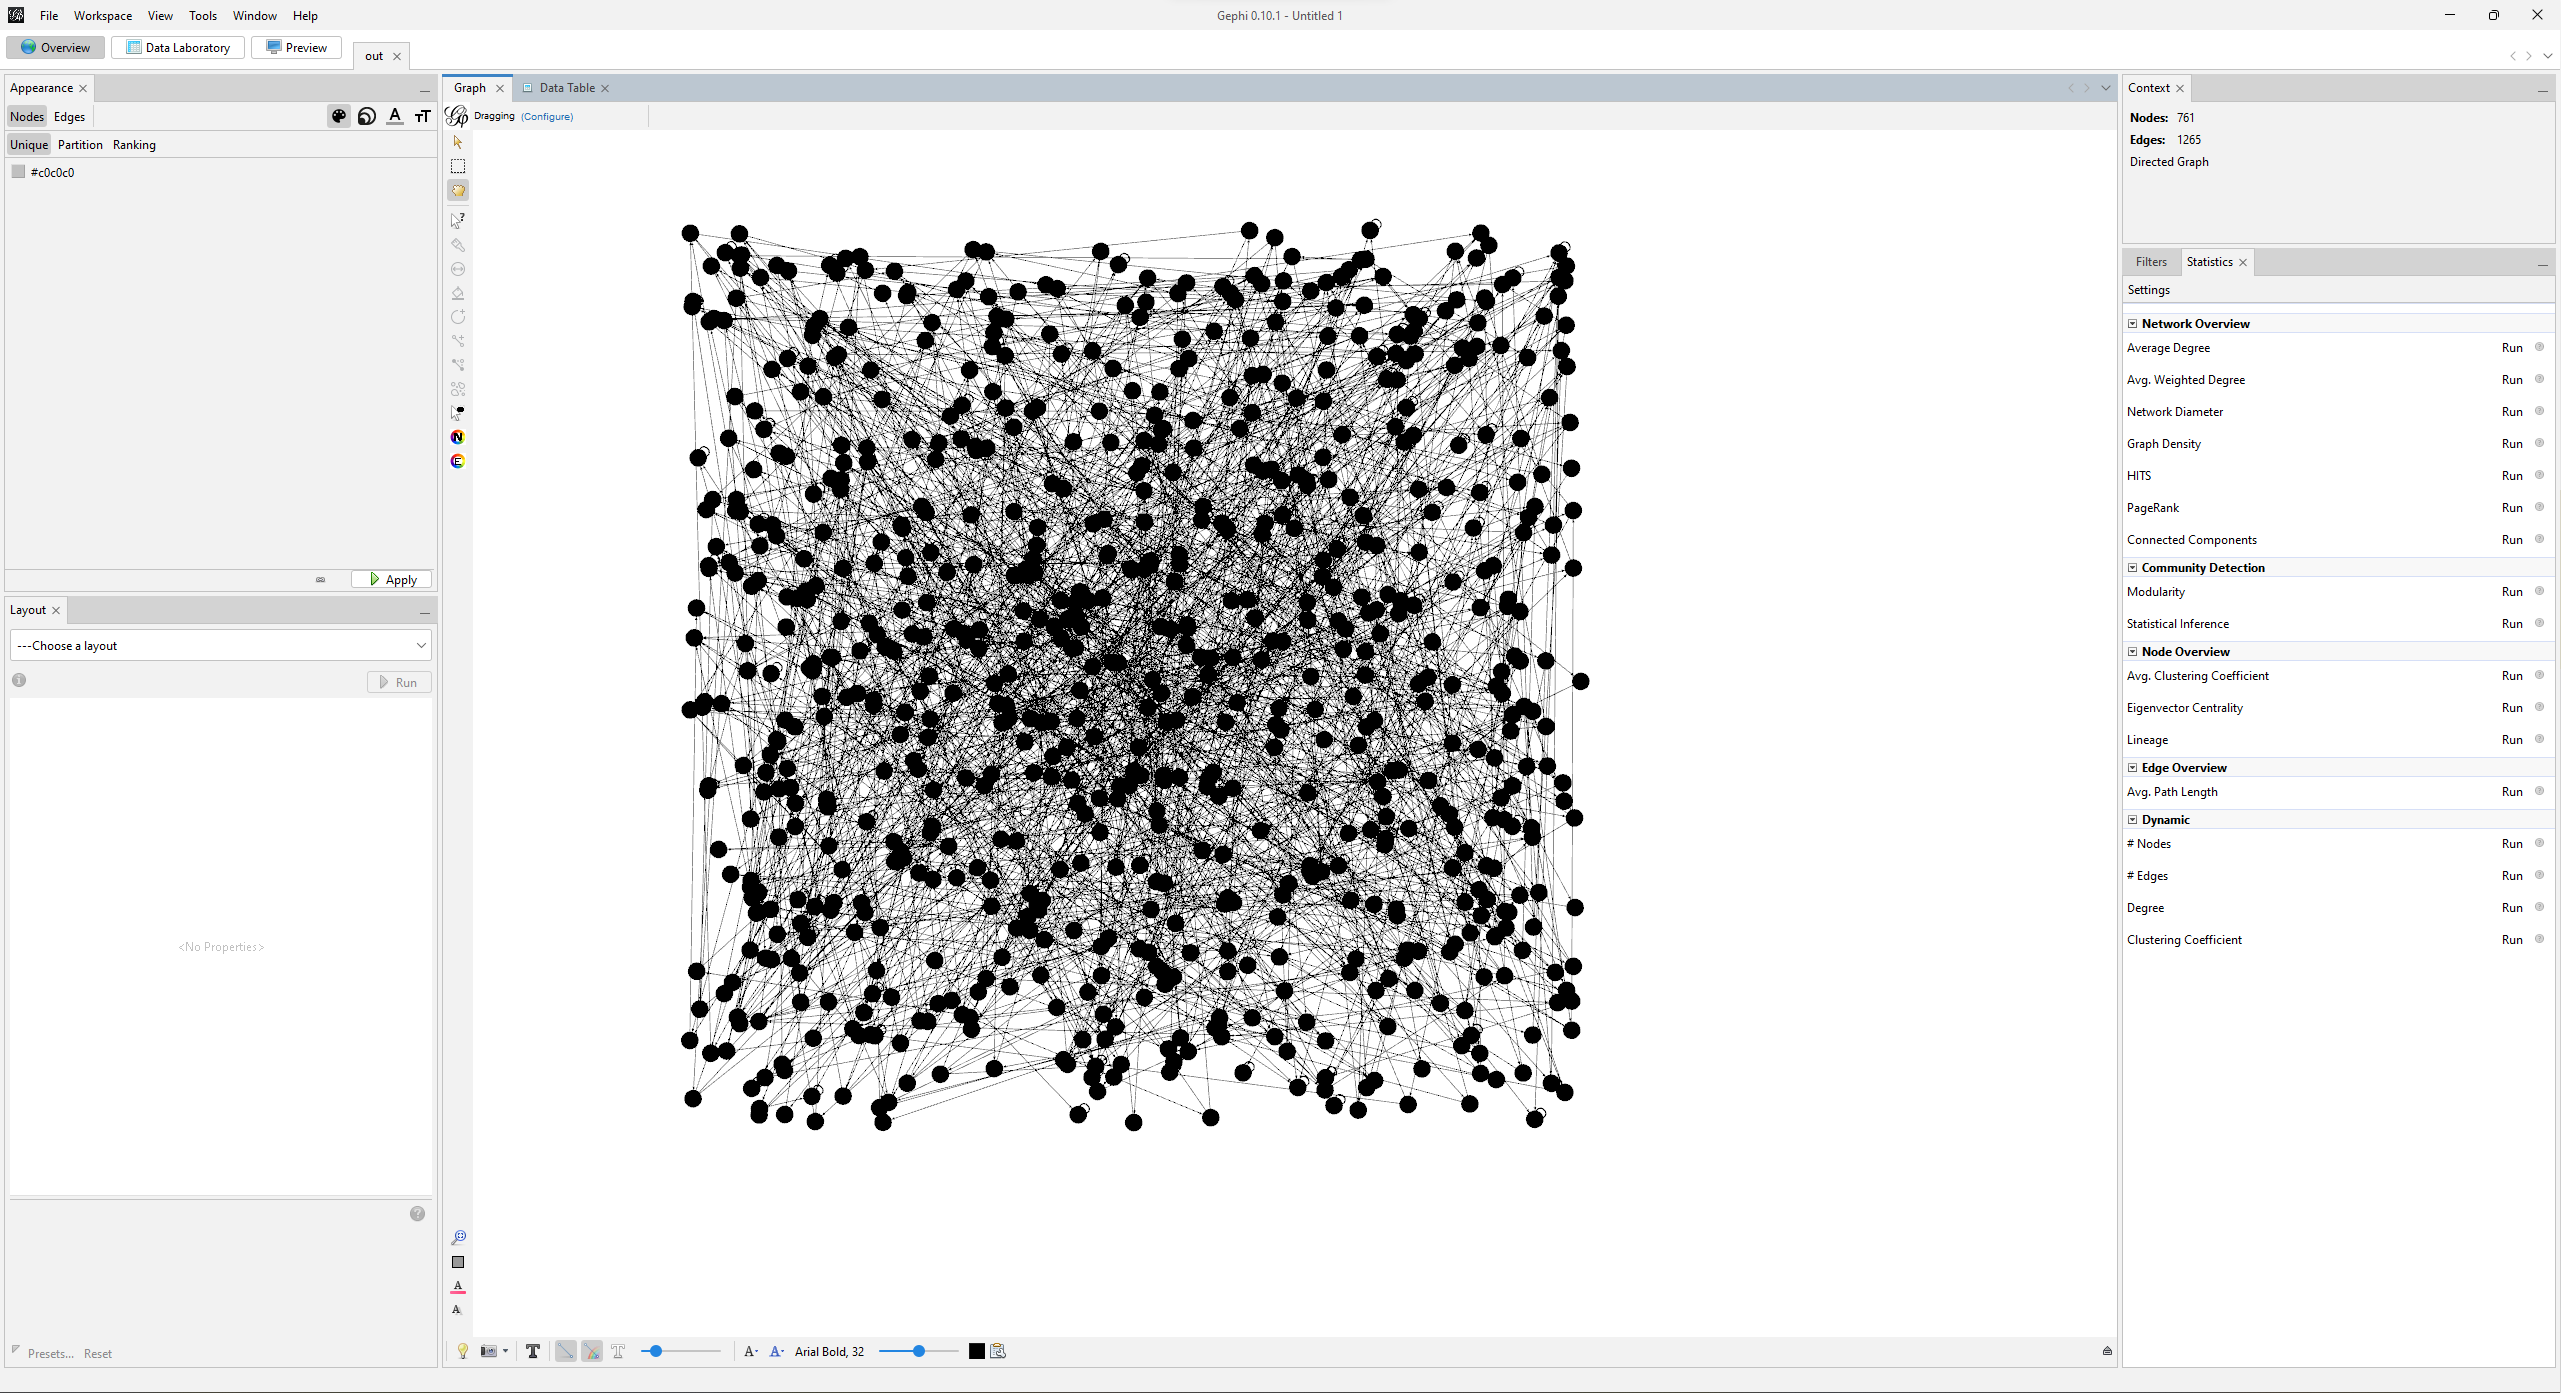 The Gephi IDE, randomly shoving all the nodes in a square